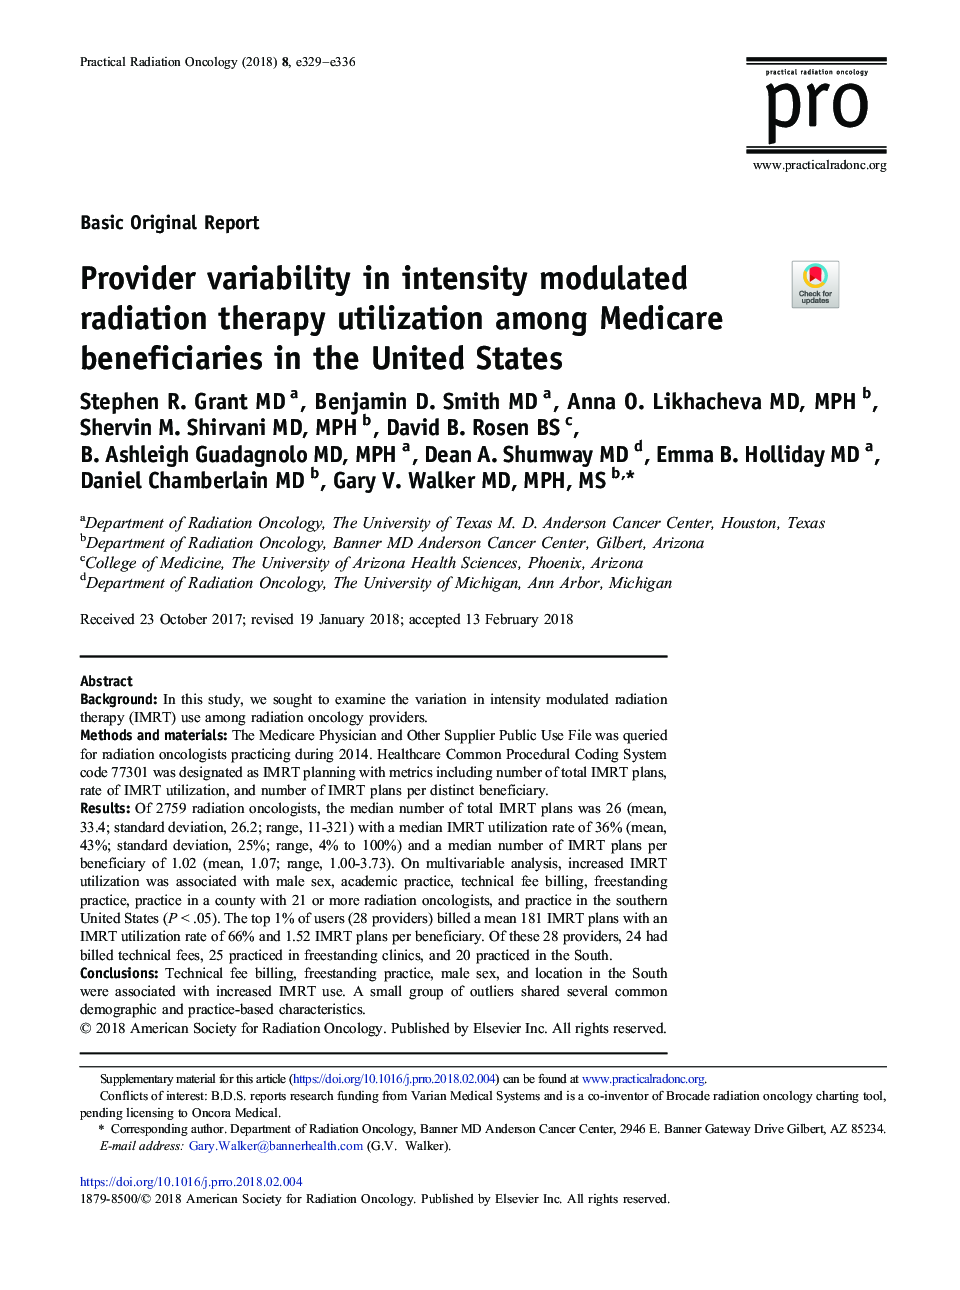 Provider variability in intensity modulated radiation therapy utilization among Medicare beneficiaries in the United States